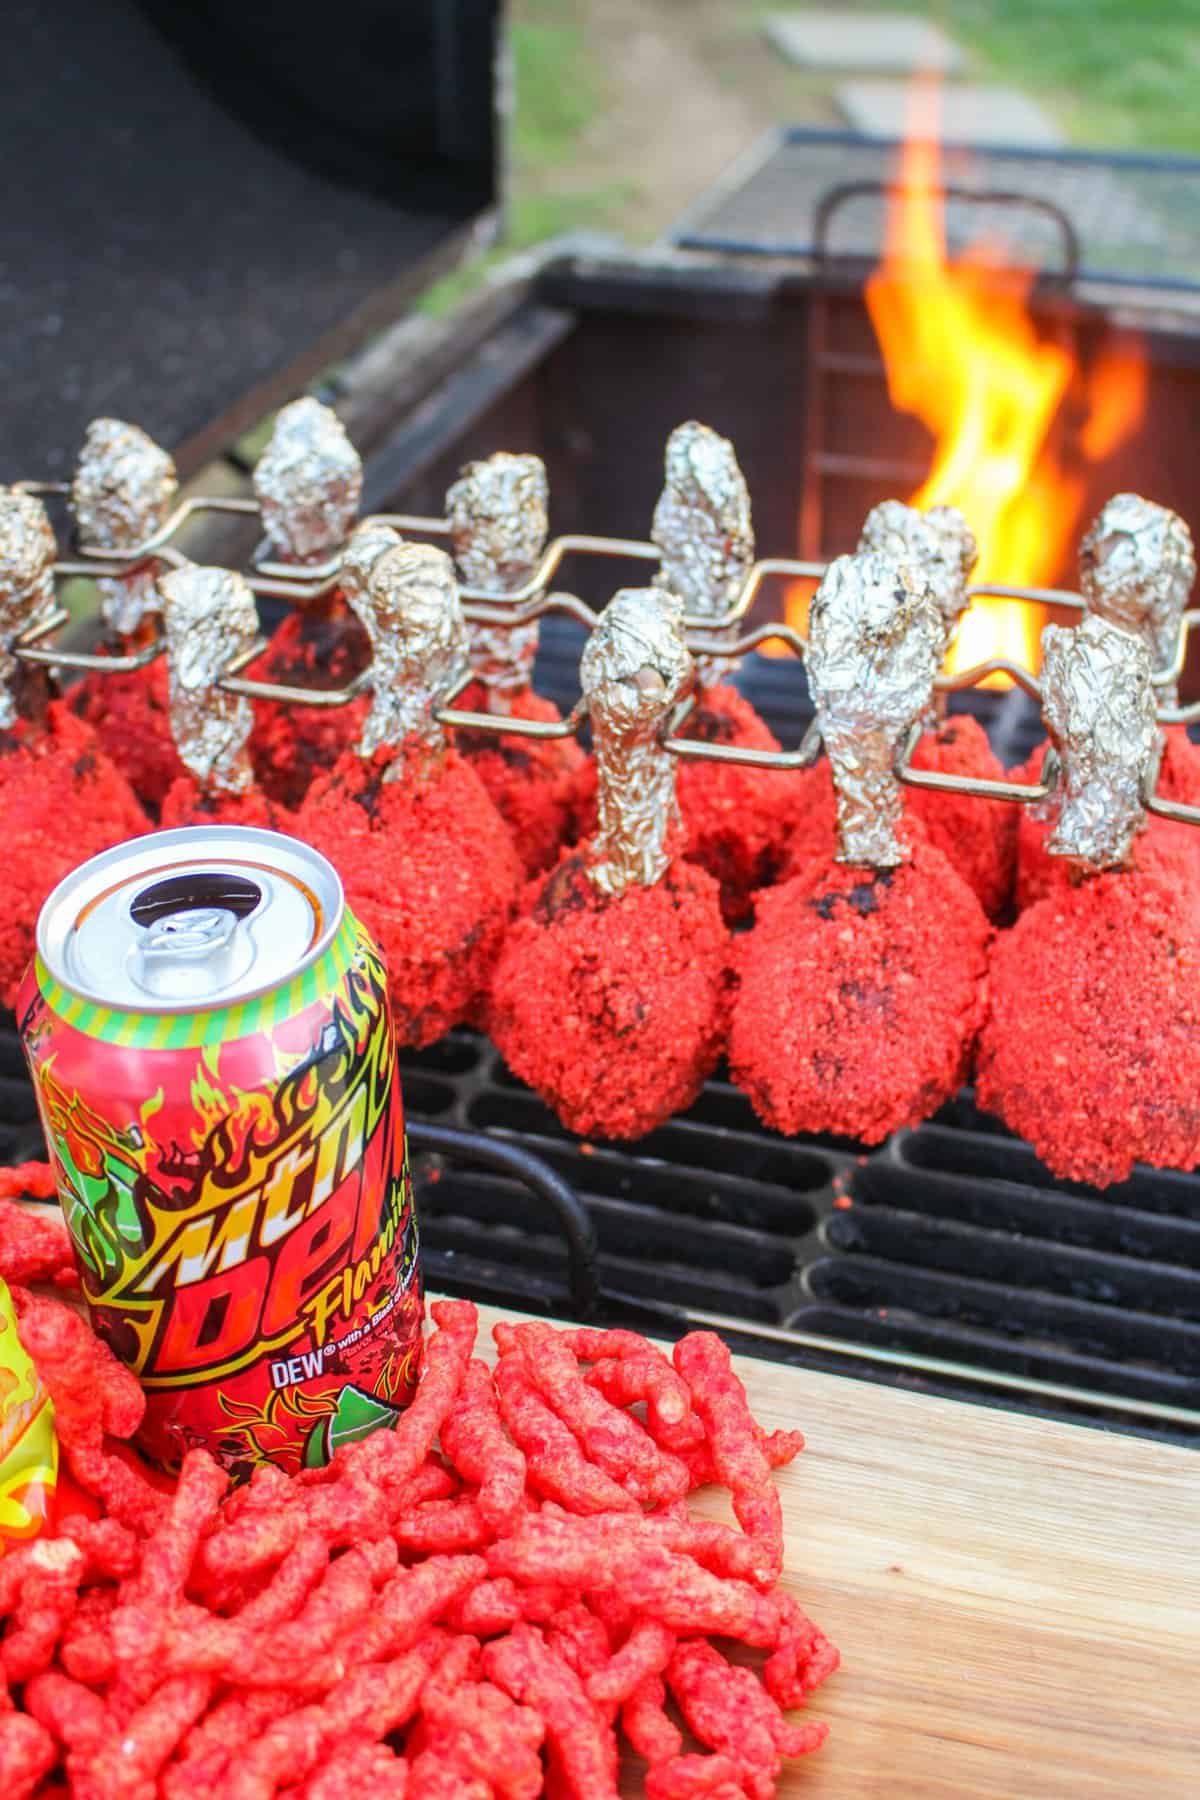 Flamin' Hot Chicken Lollipops sitting on the grill with fire in the background.